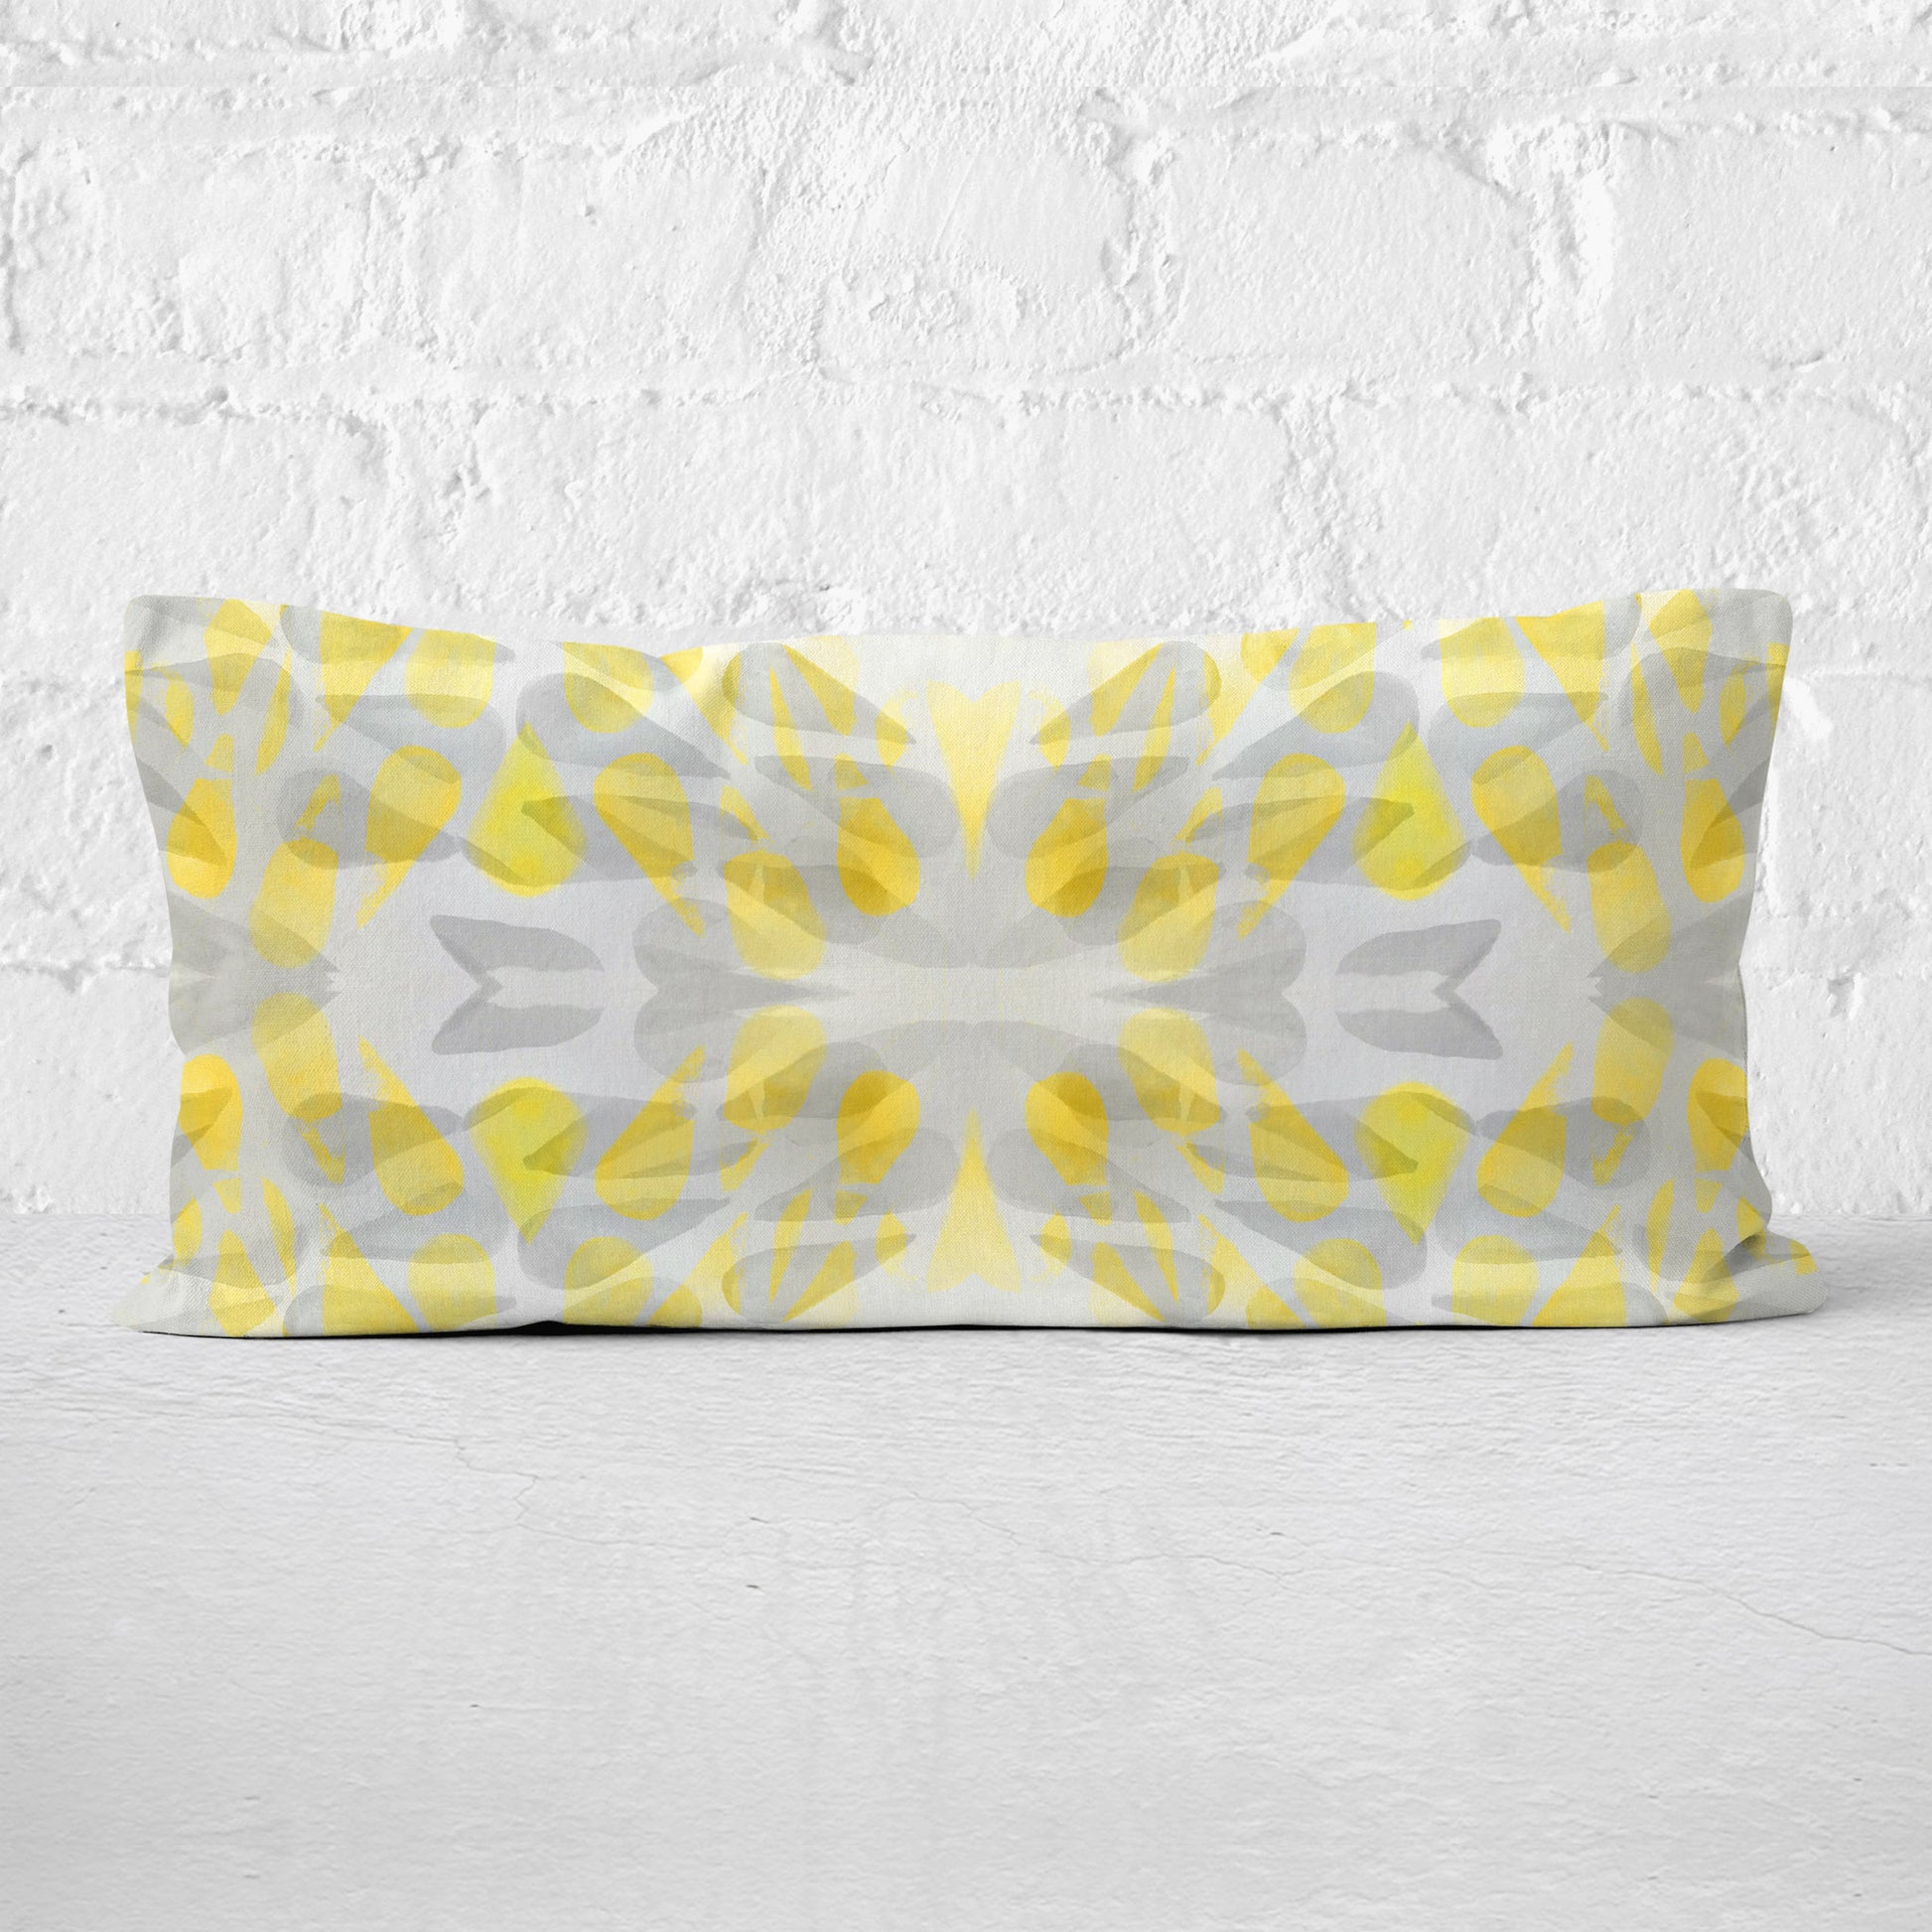 Rectangular lumbar pillow featuring an abstract hand-painted pattern in yellow and grey tones leaning against a white brick wall.